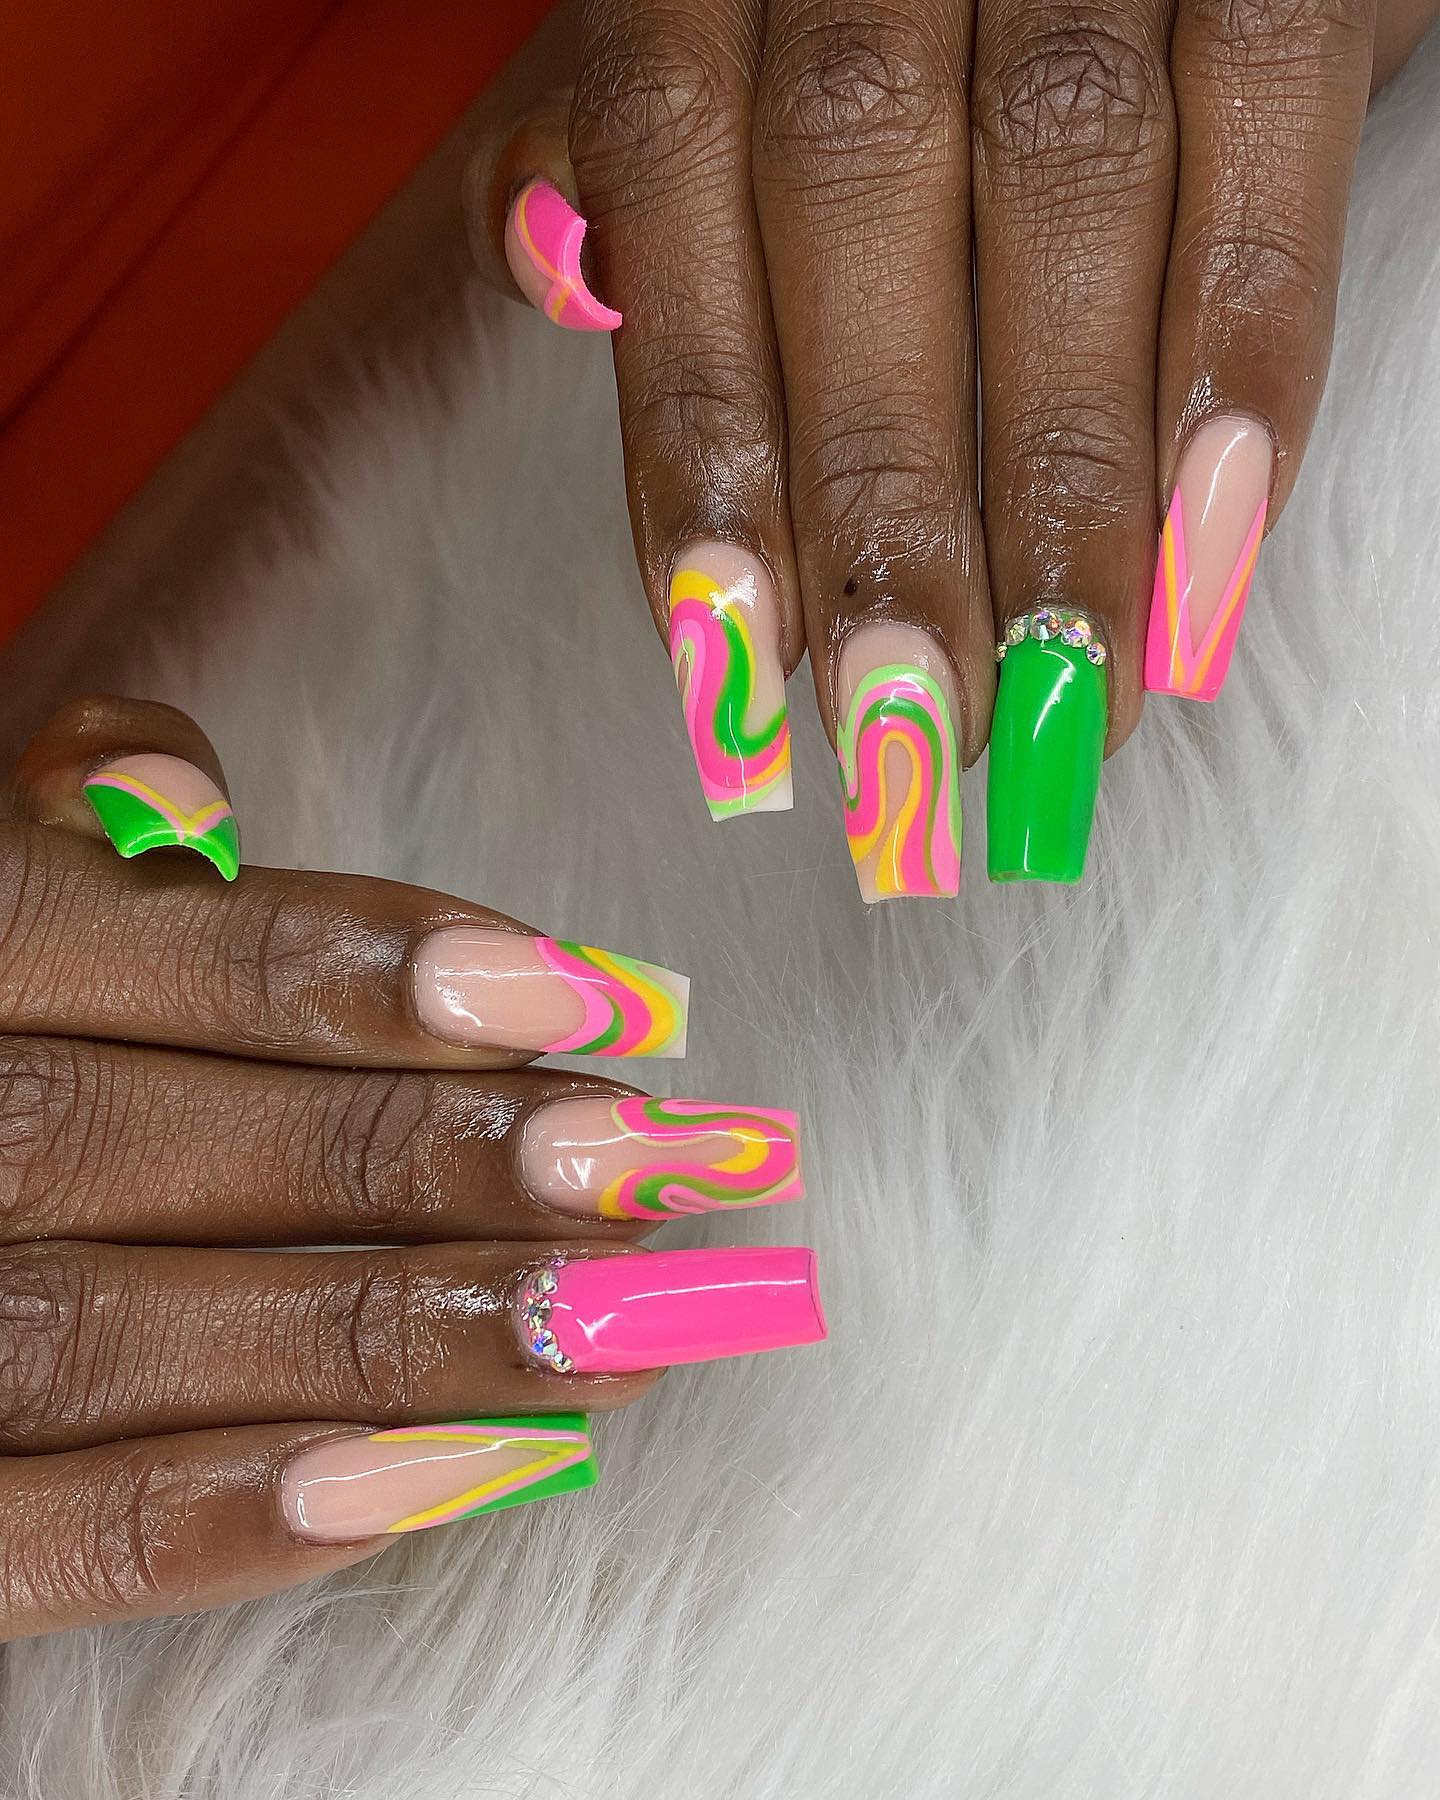 Pink, green and a little bit of yellow color are insanely perfect to combine with each other. All of these swirls, stones and accent nails will make you look amazing.